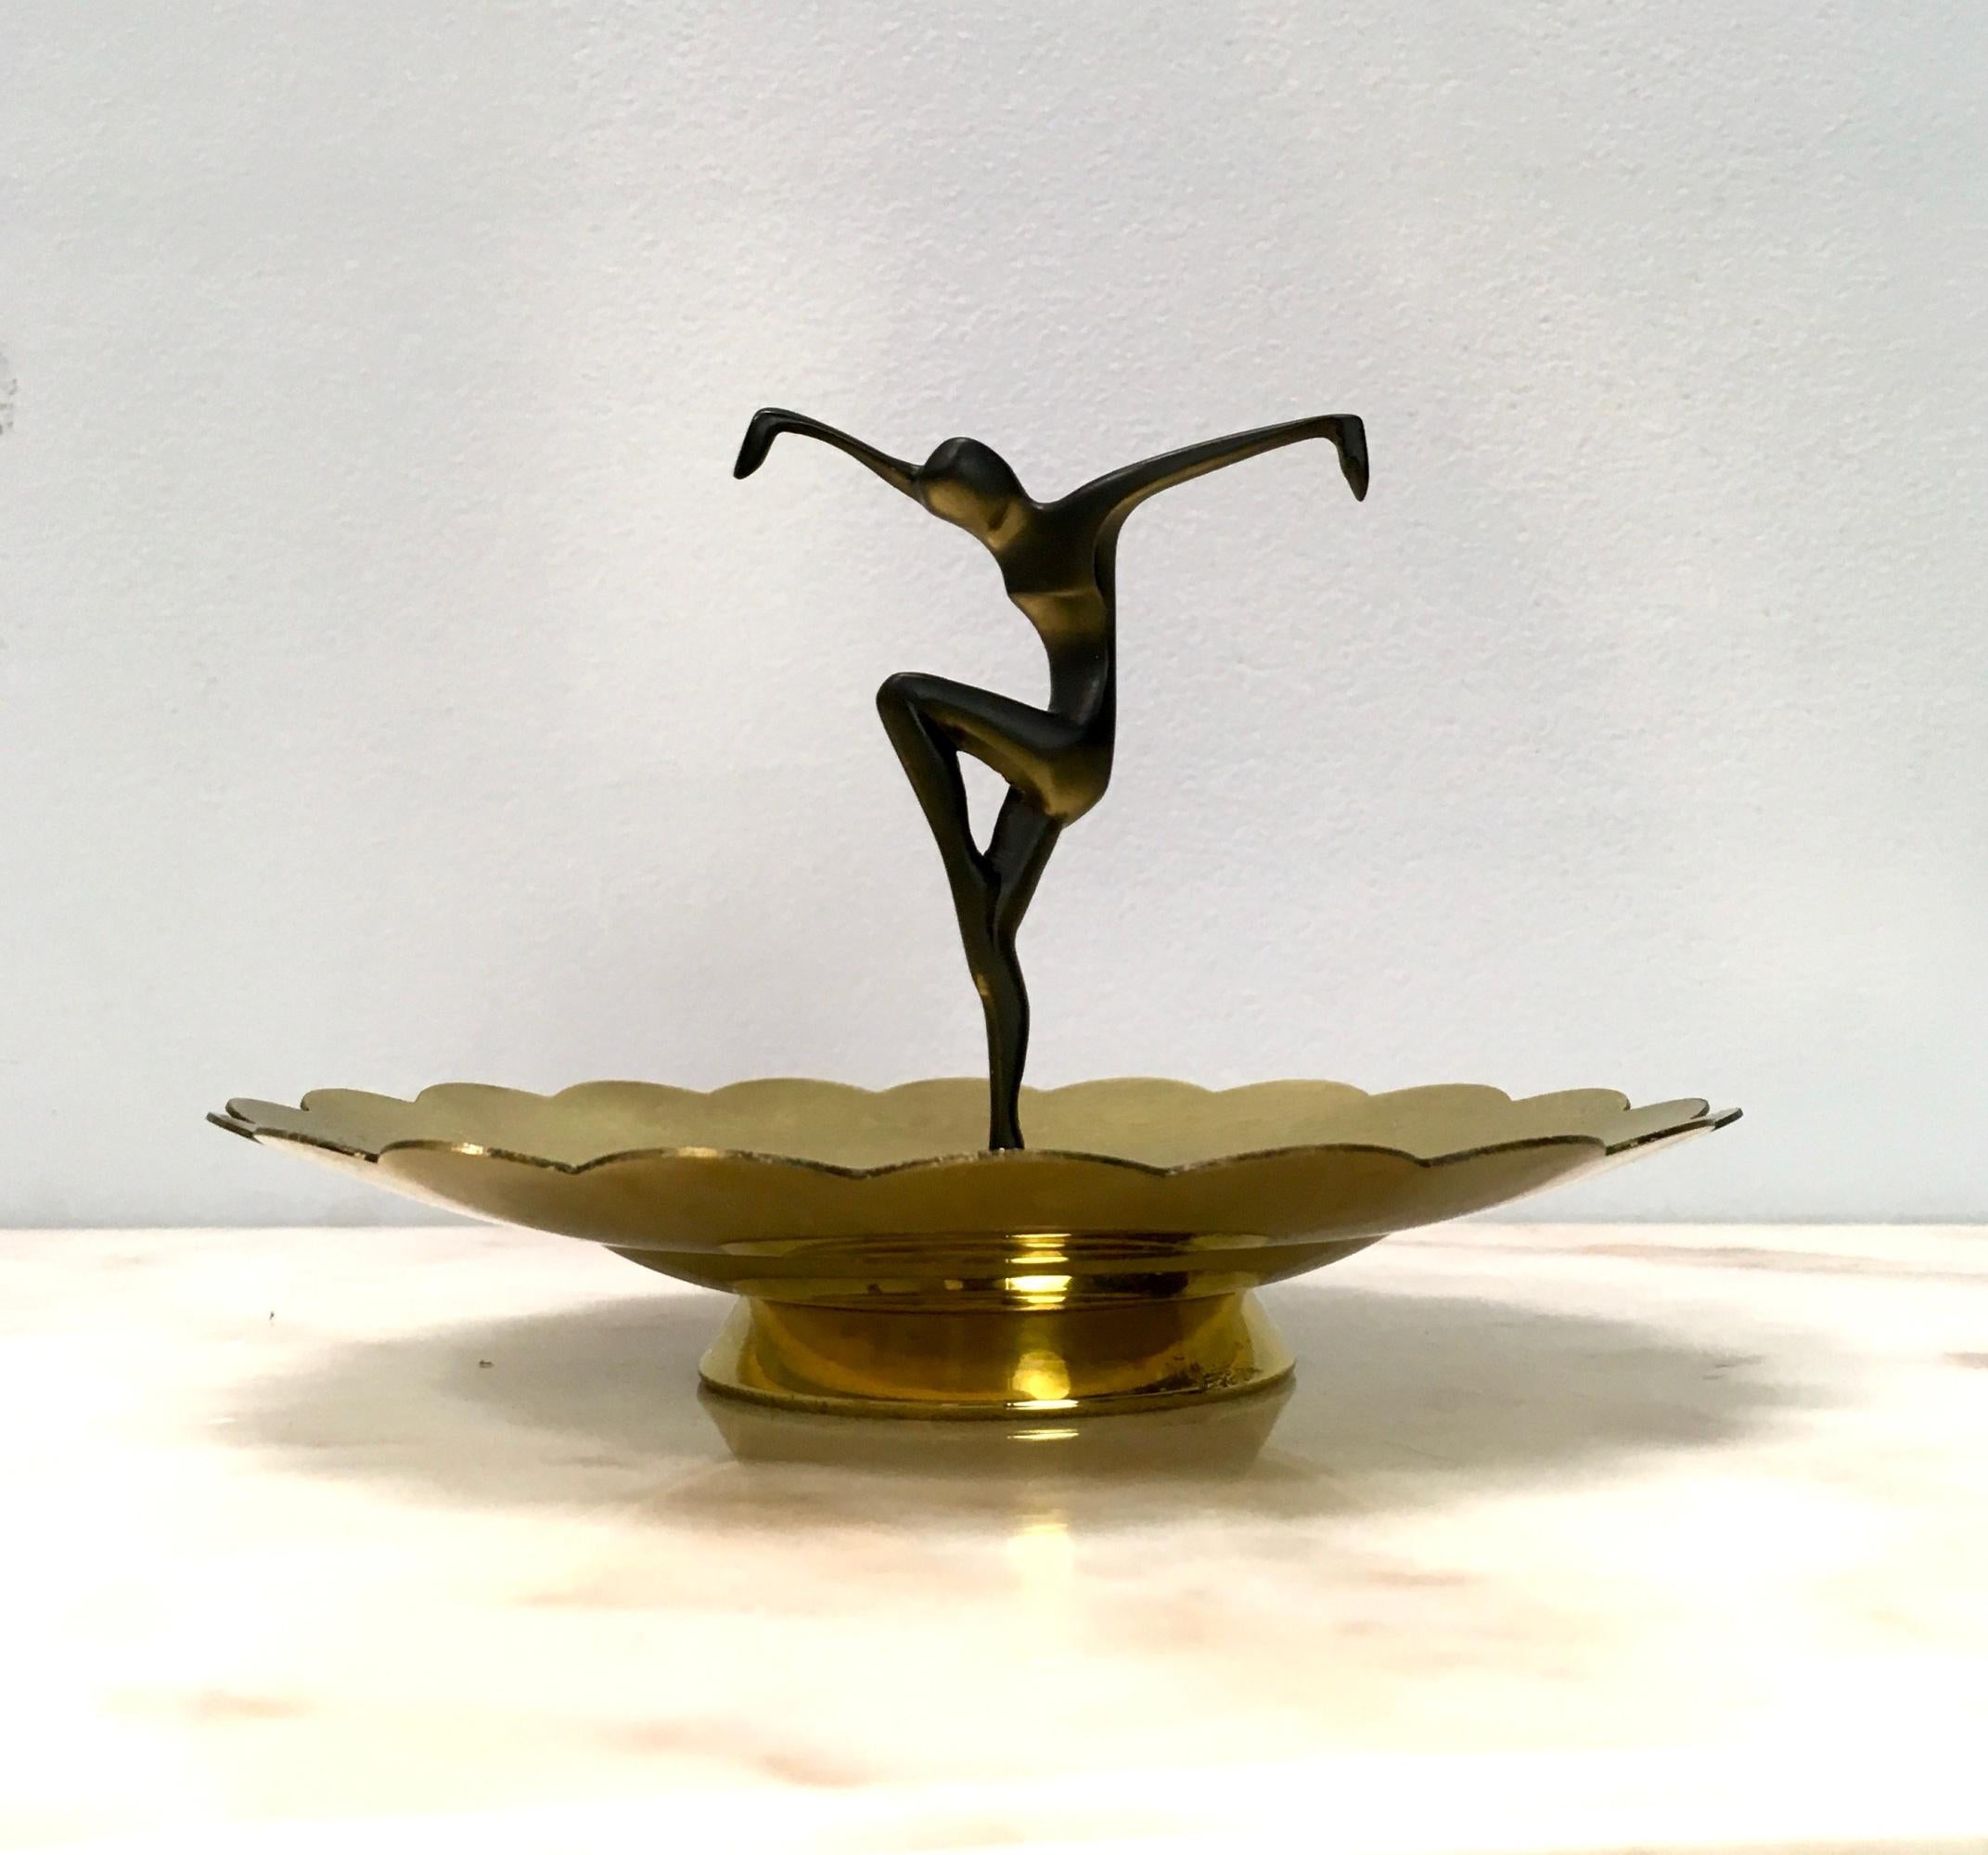 Italian Vintage Brass and Metal Decorative Item / Vide-Poche with Dancing Figure, Italy